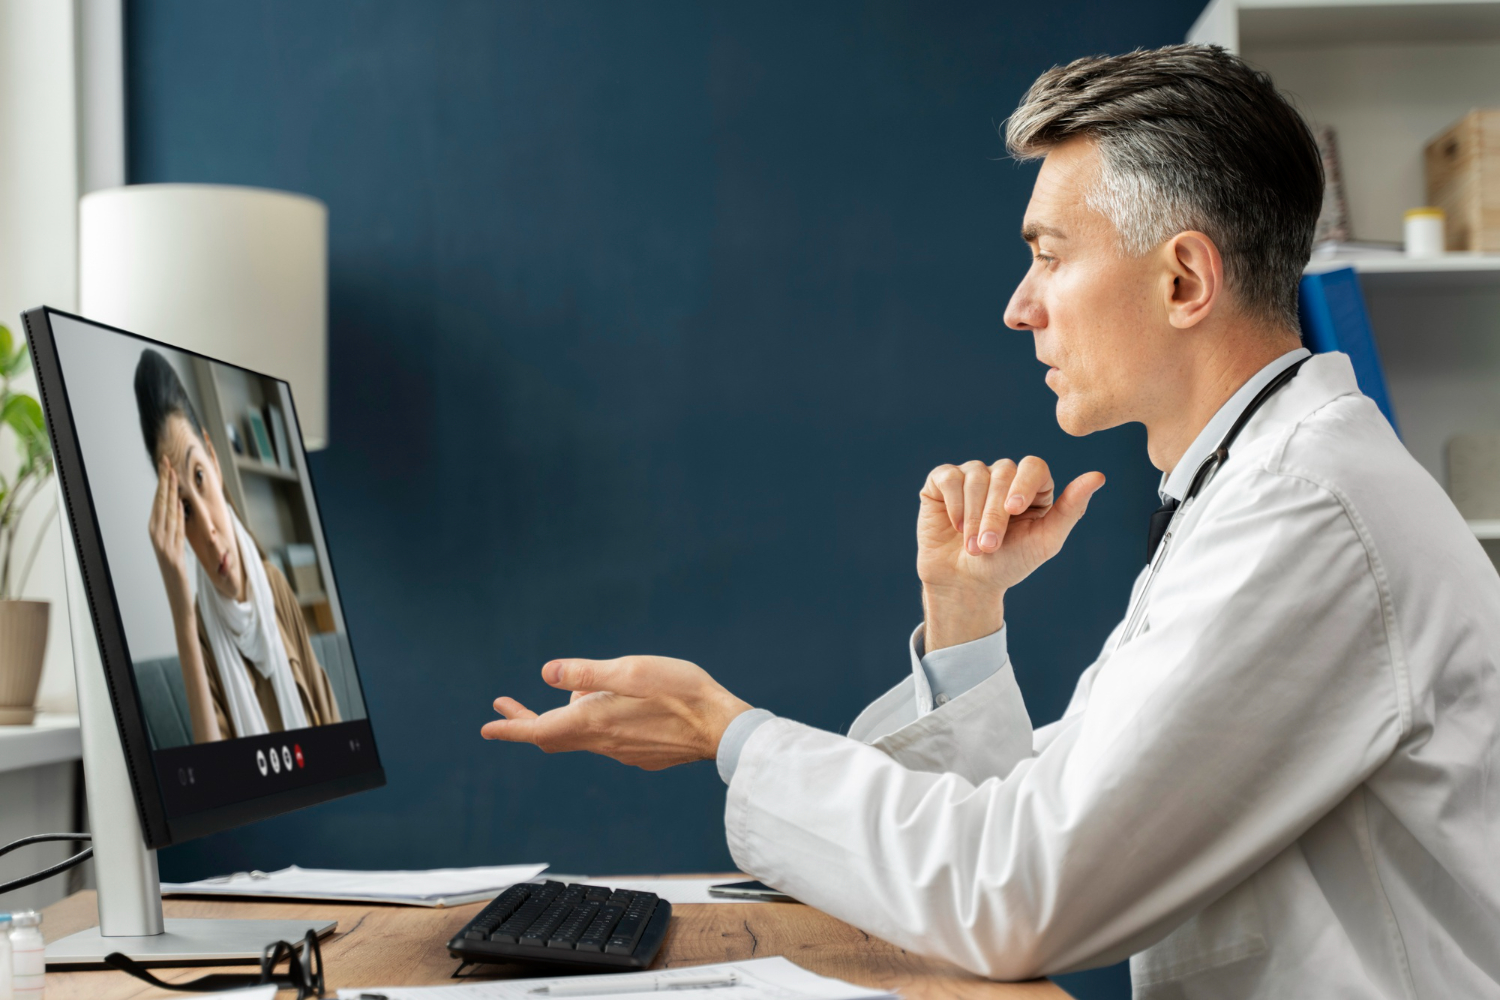 HIPAA-compliant telehealth video conferencing solutions